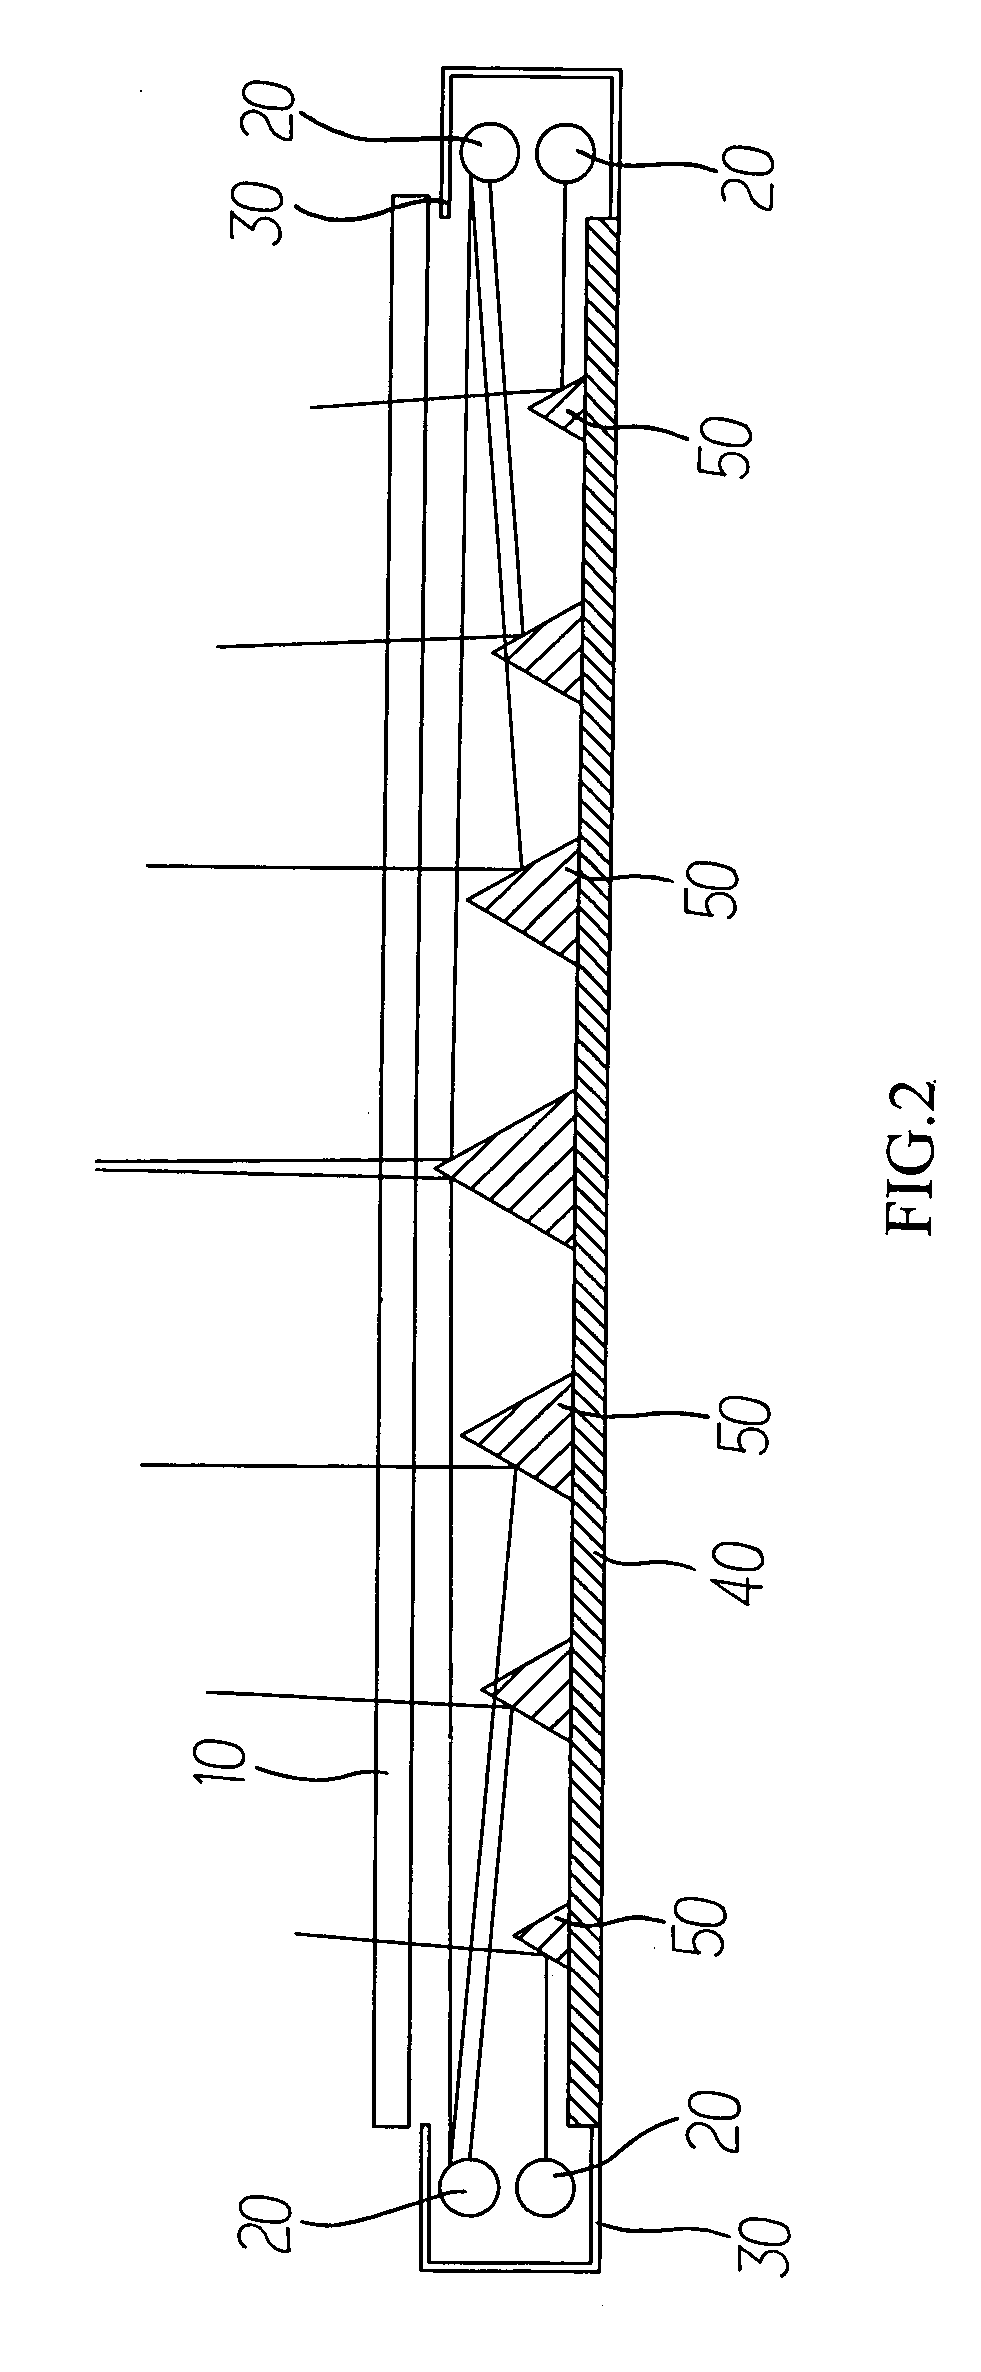 Light equalizing structure of backlight modules